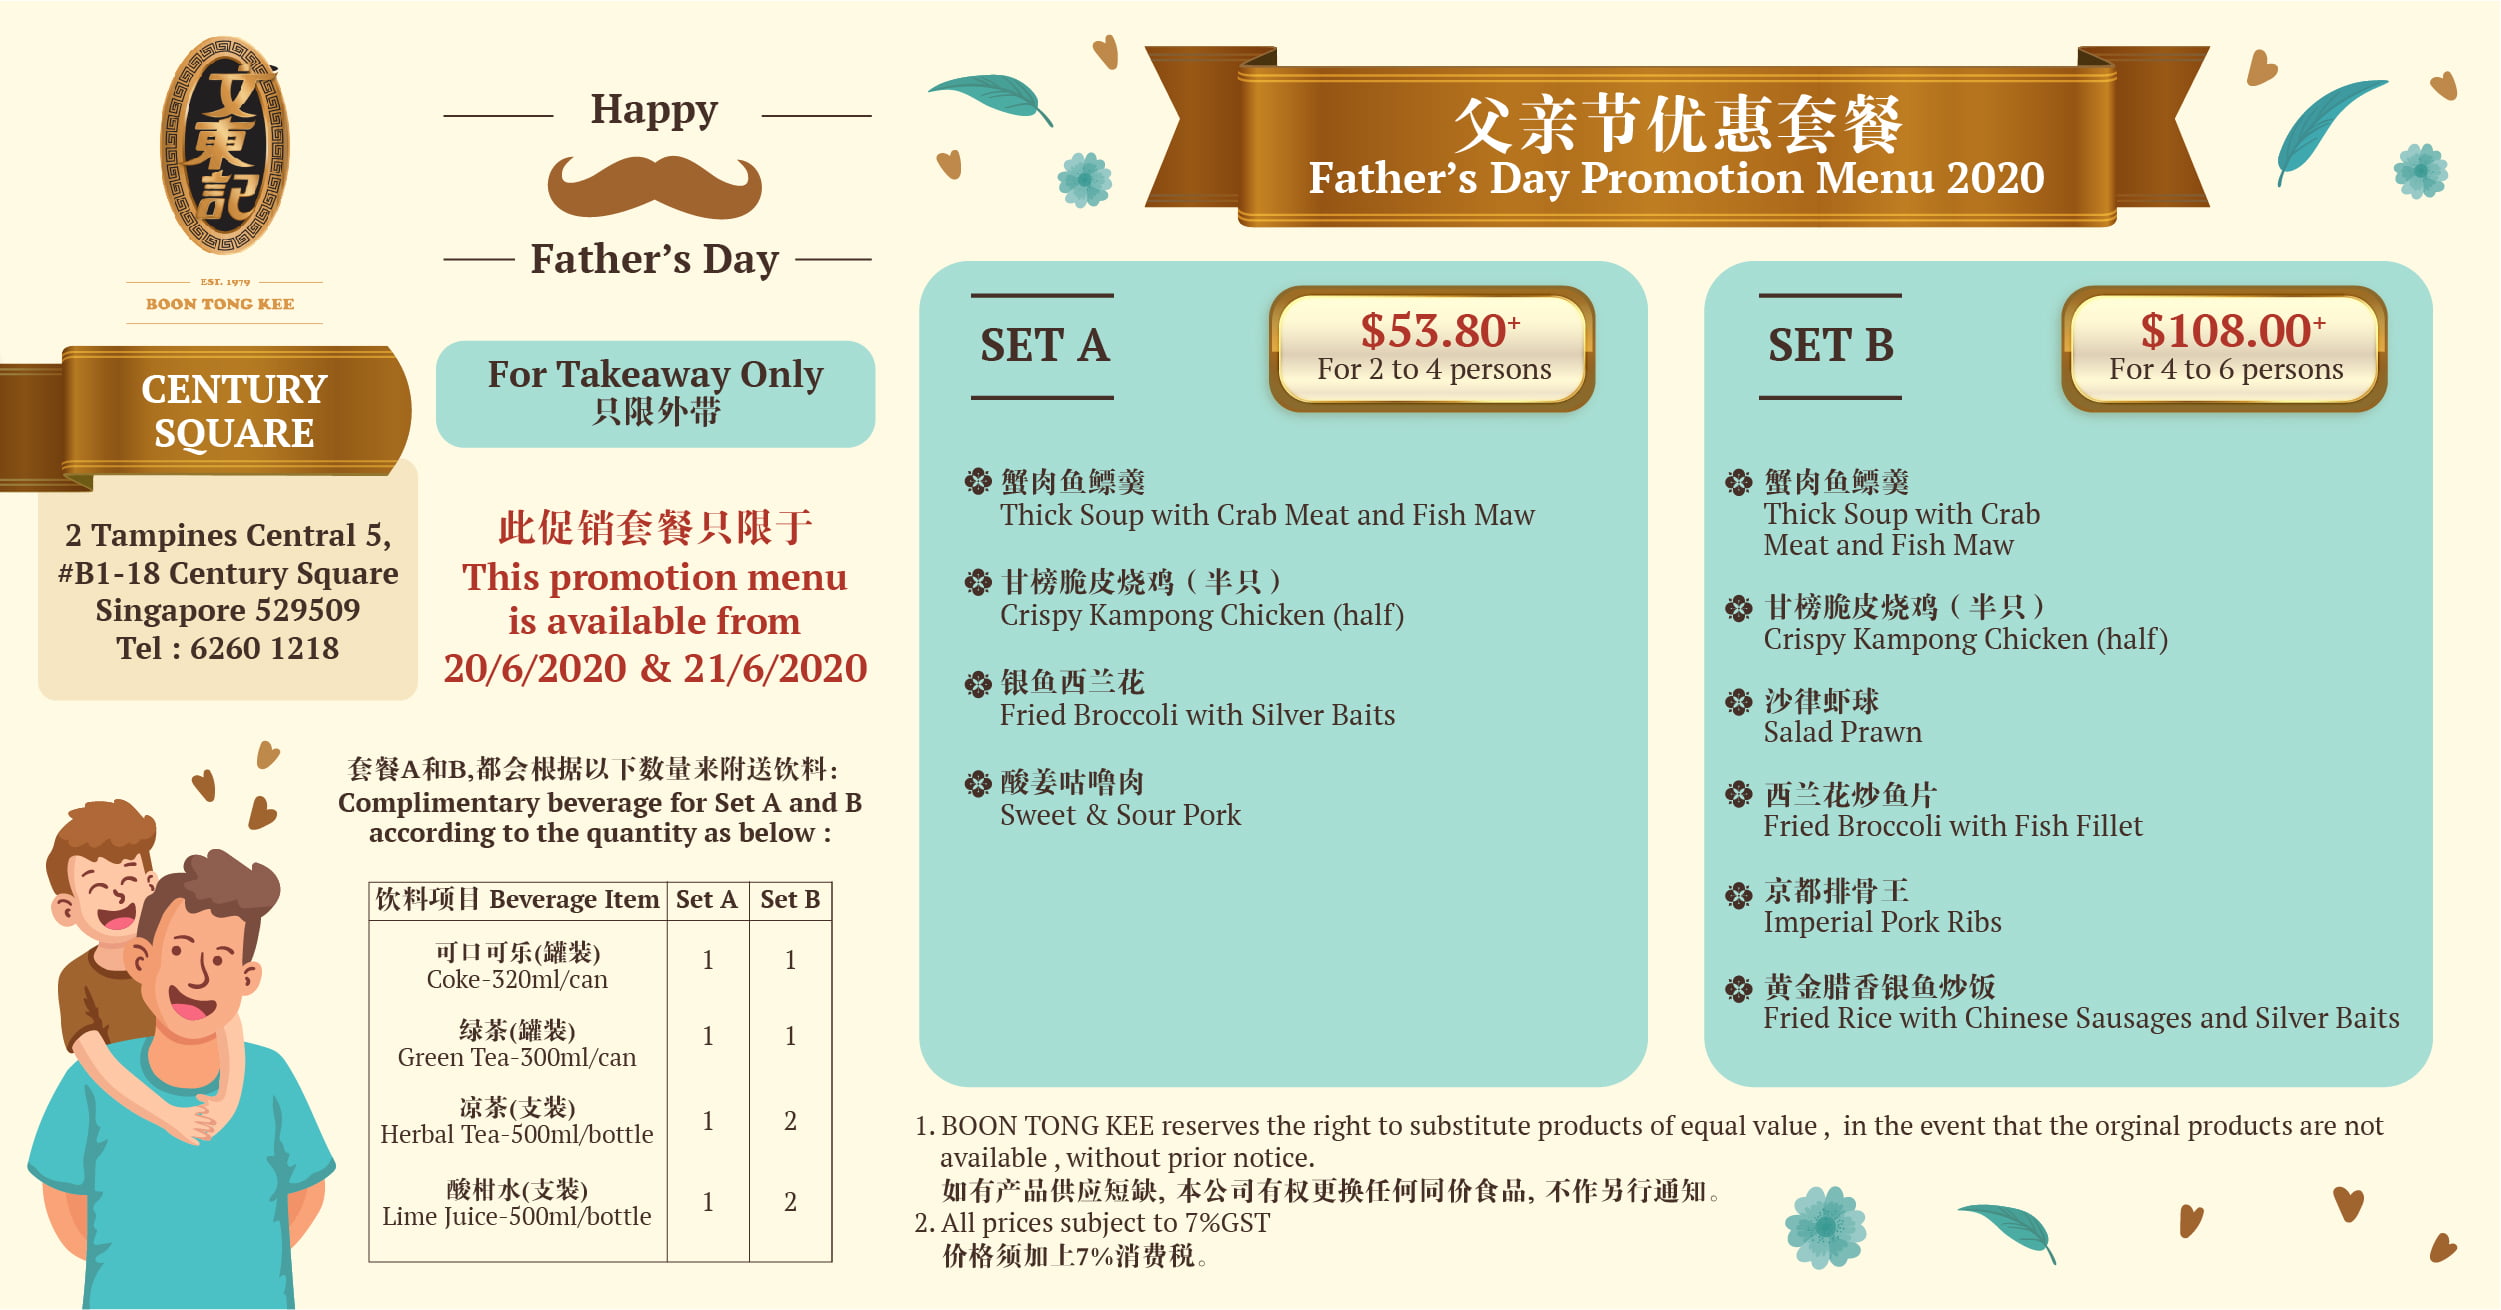 Father's Day Promotion Menu 2020 ( For take away only)